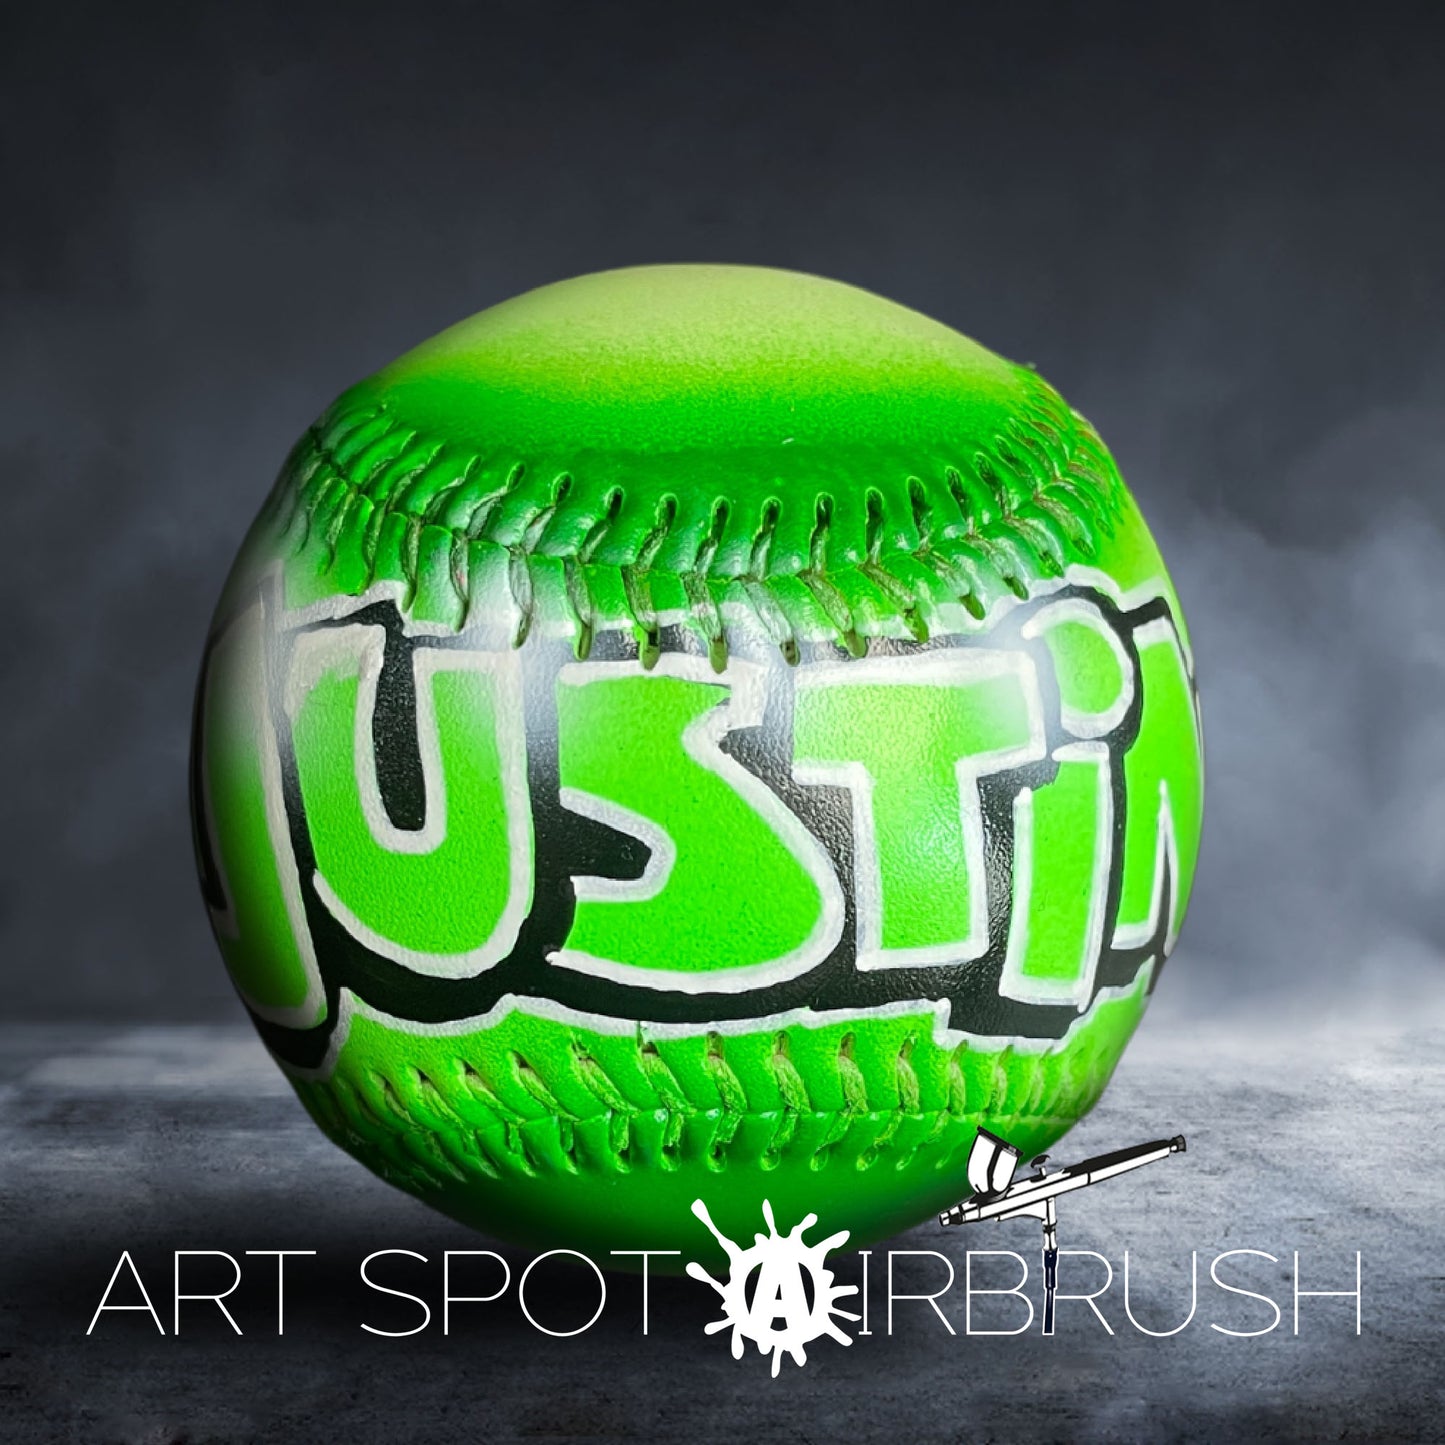 Personalized Baseball with Name in Graffiti